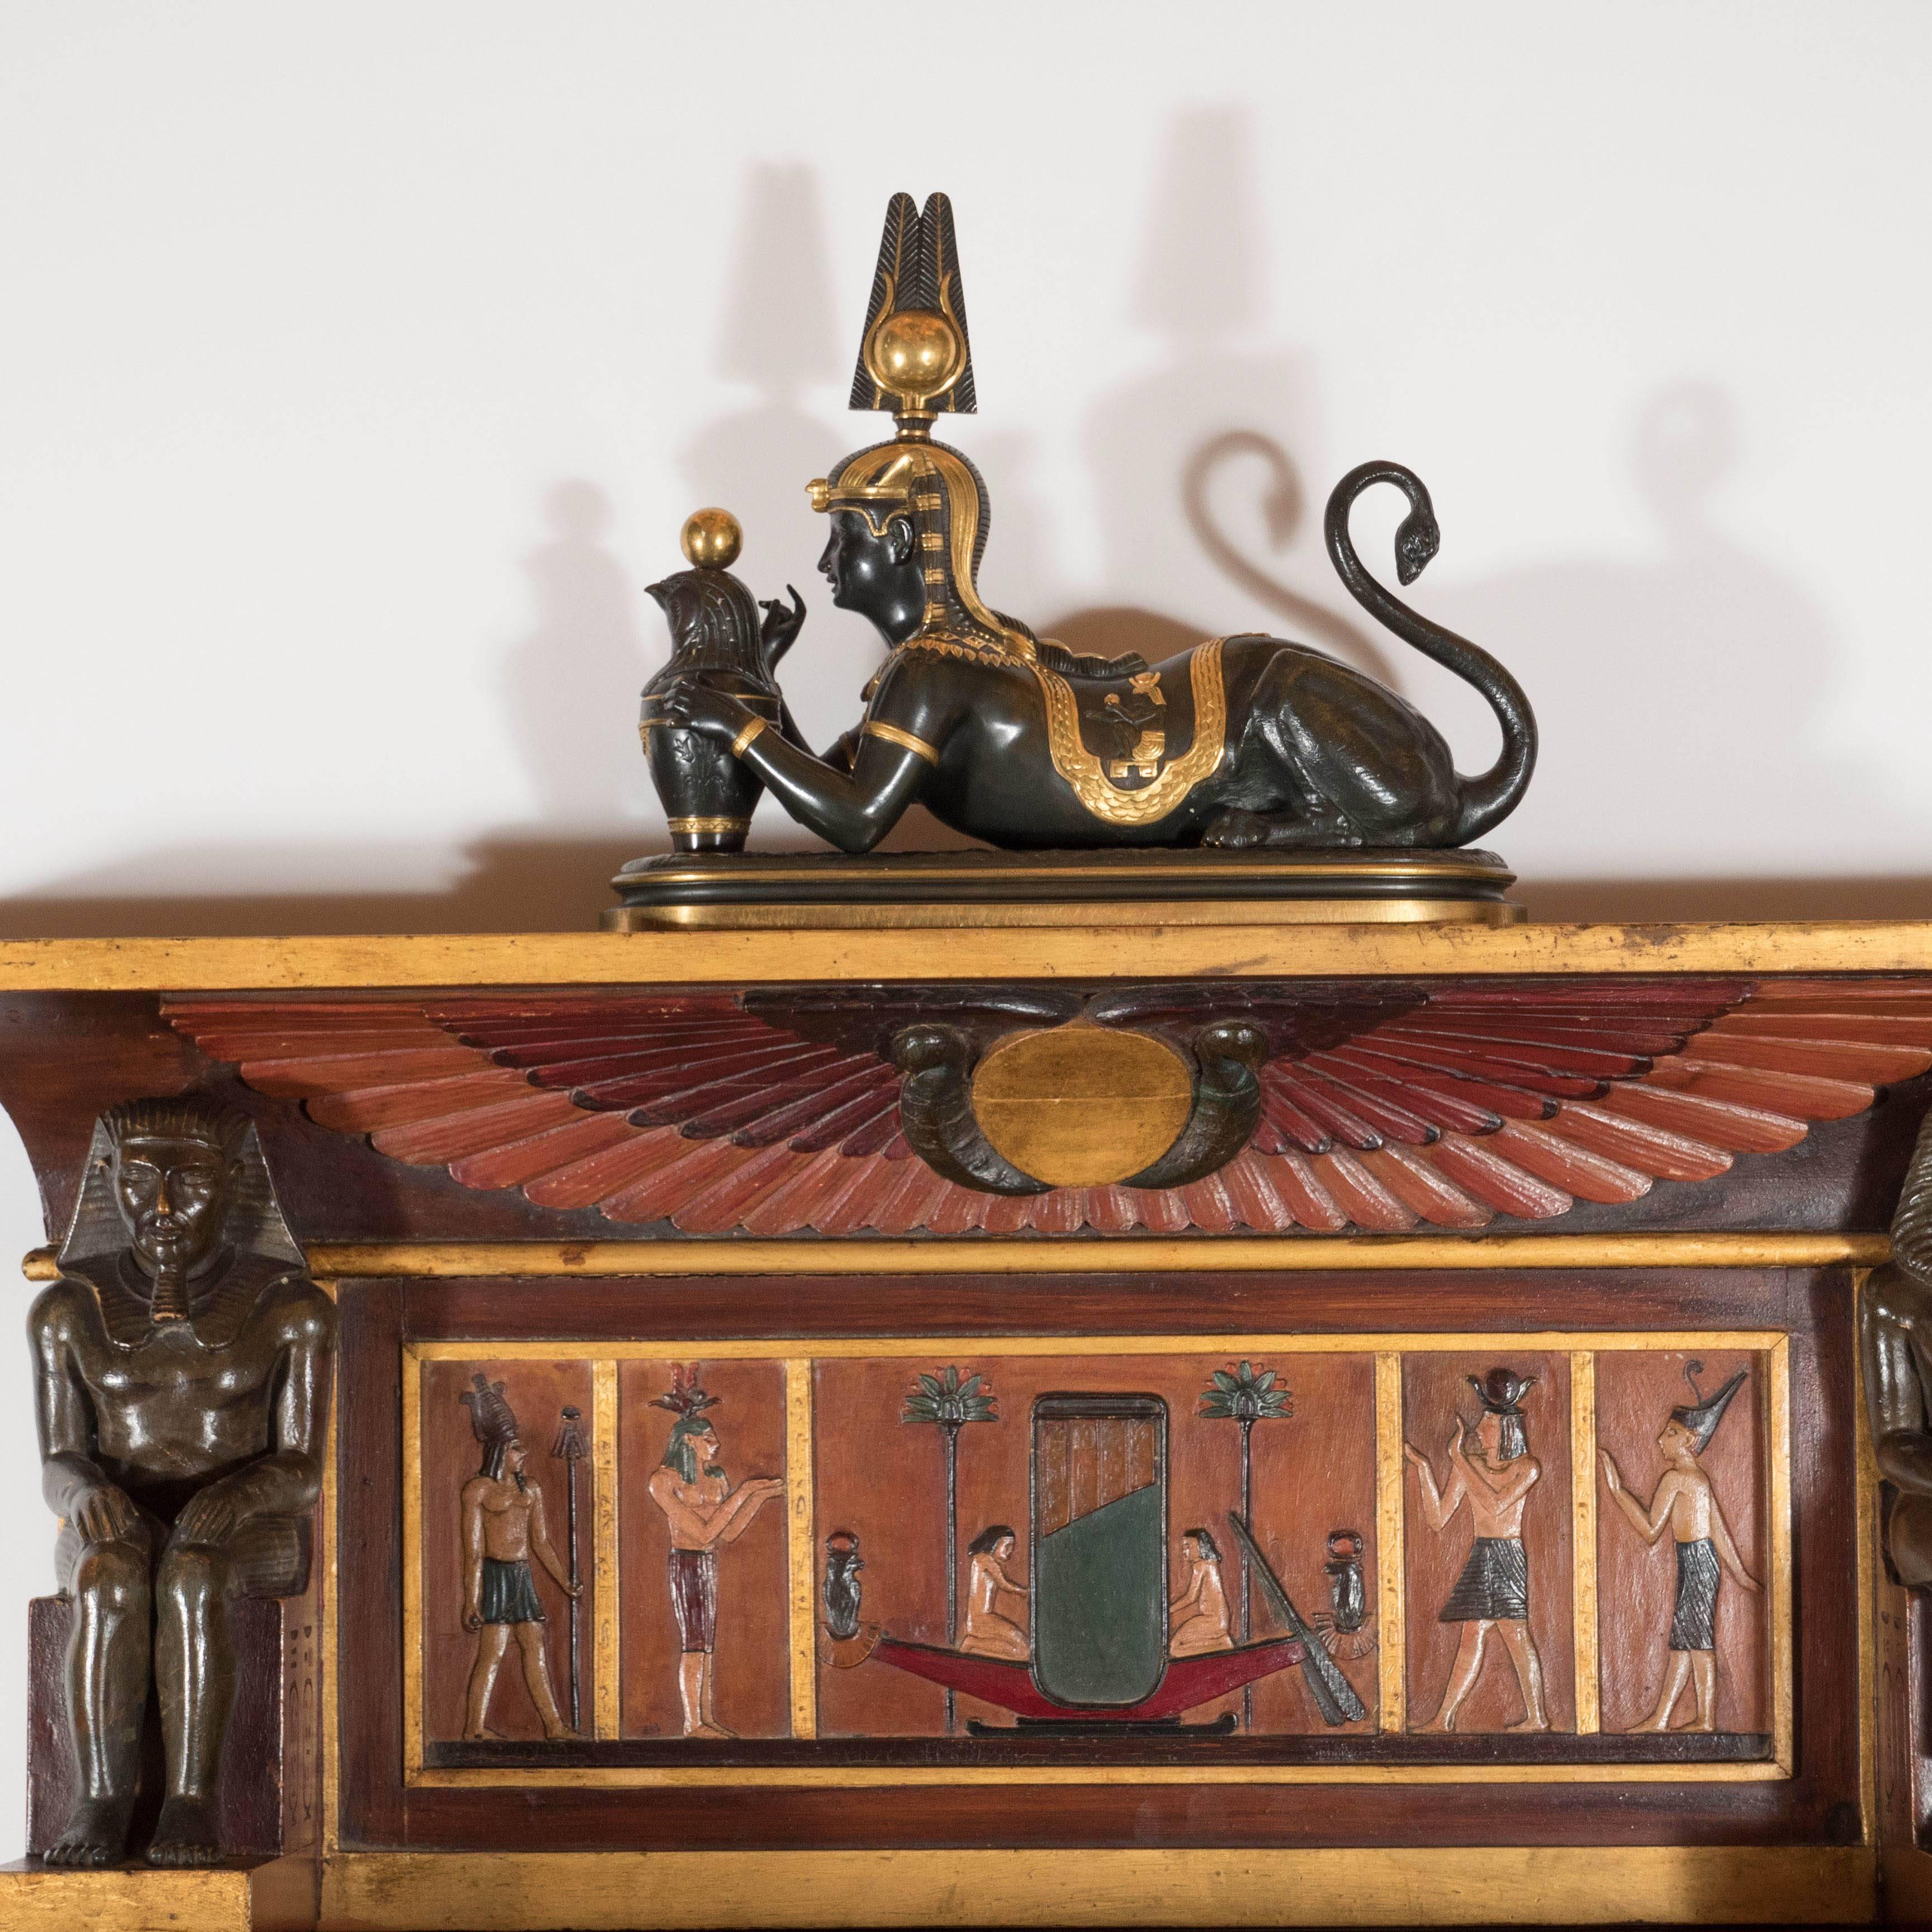 A very rare and detailed Art Deco Egyptian Revival pyramid secretaire with 24-karat gold leaf detailing throughout. A trapezoidal central section features a hinged drop-down panel which depicts horse and chariot scenes with surrounding workers.